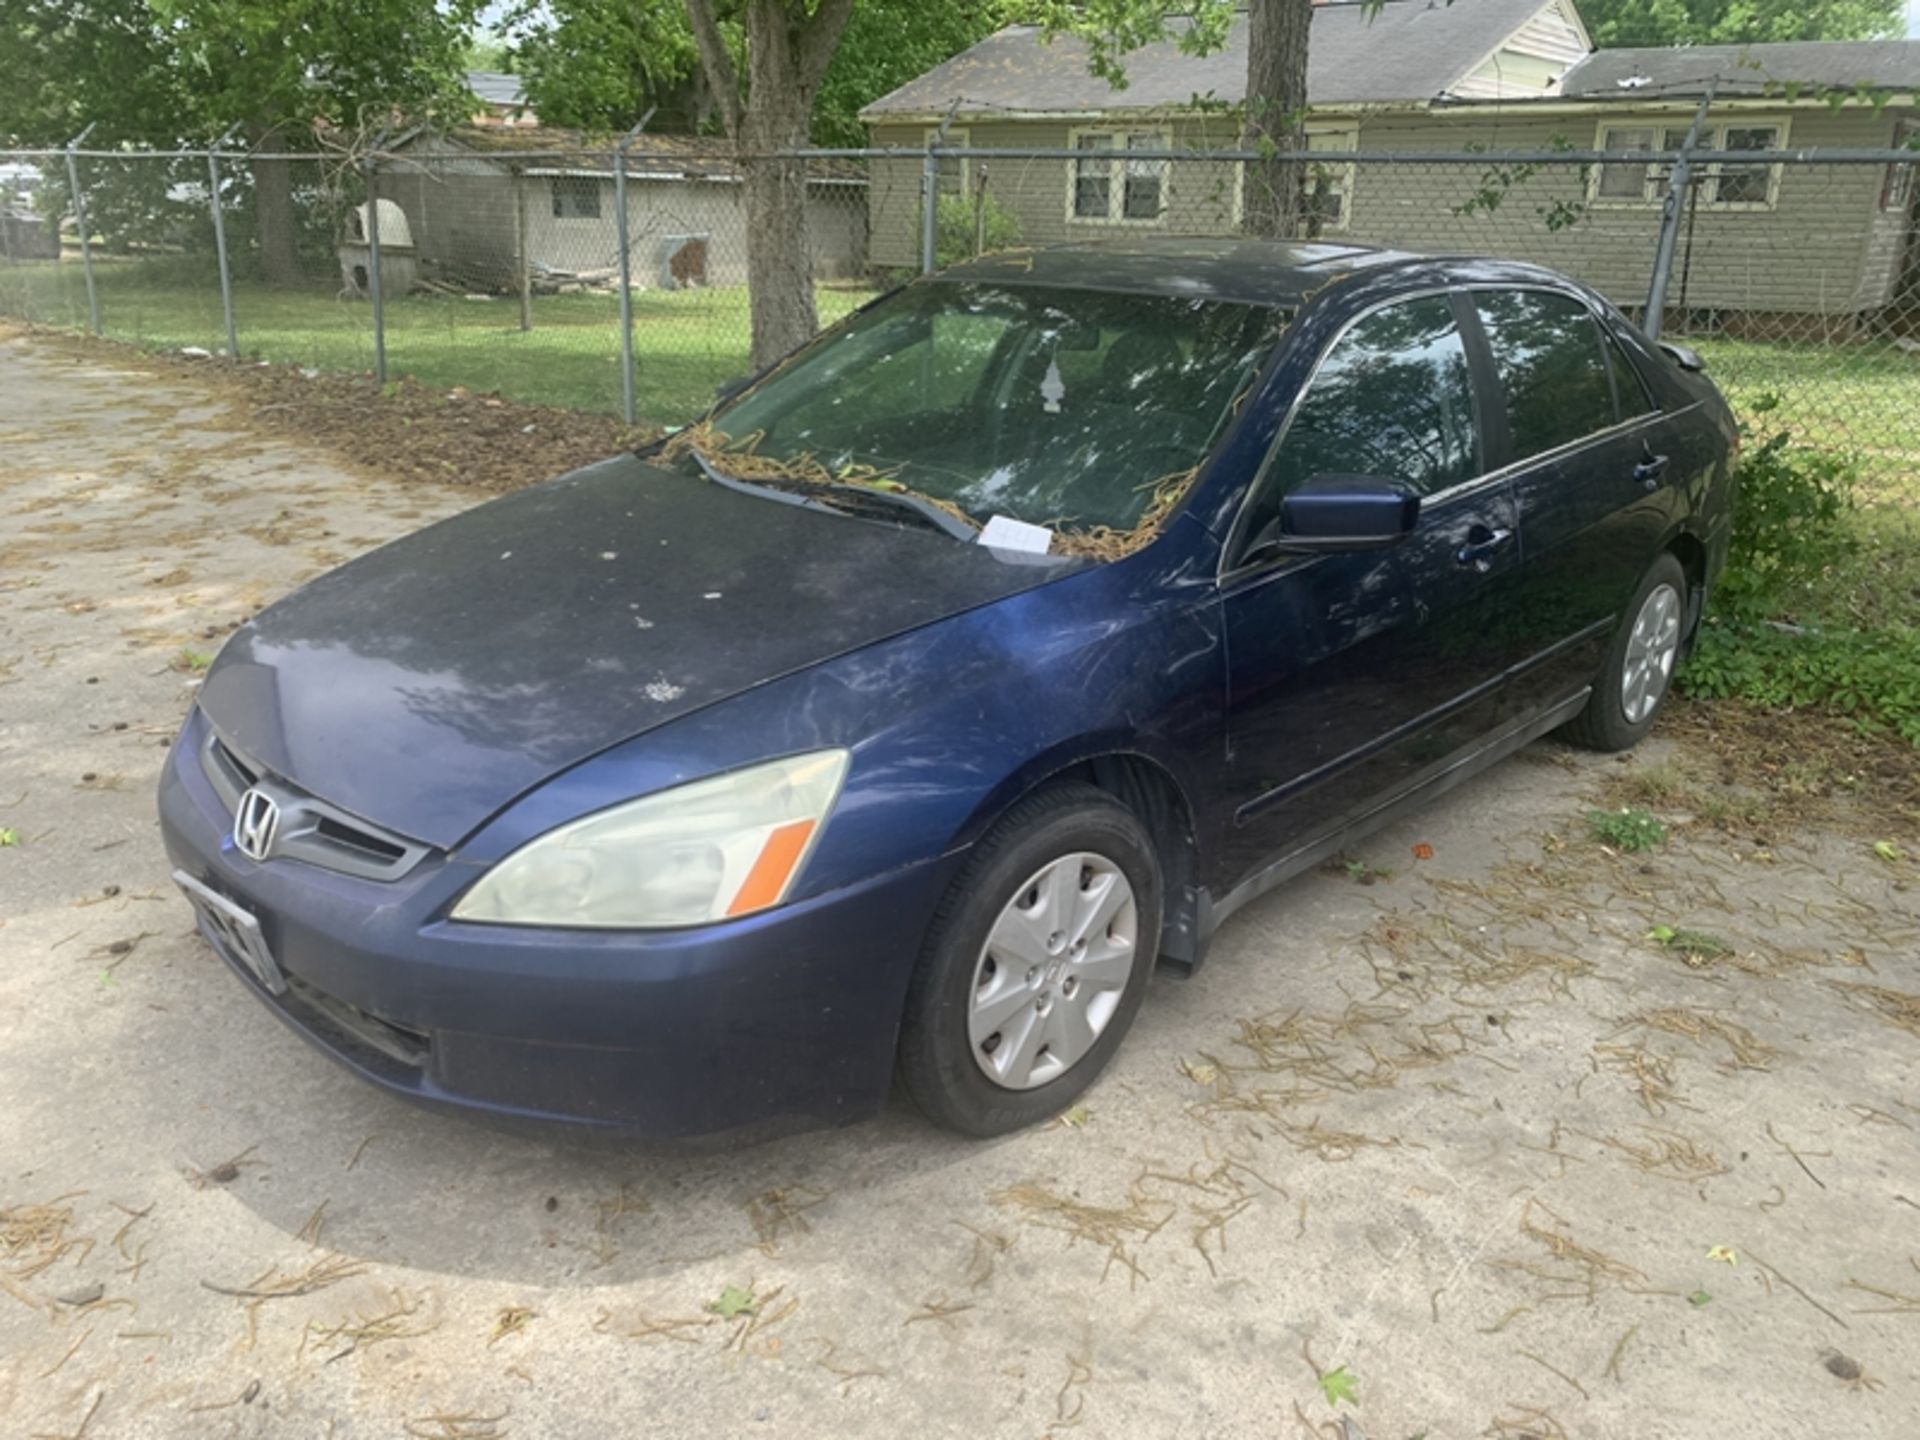 2003 HONDA Accord - 274,715 miles showing - 1HGCM56343A125972 (NOT RUNNING) Vehicle will not